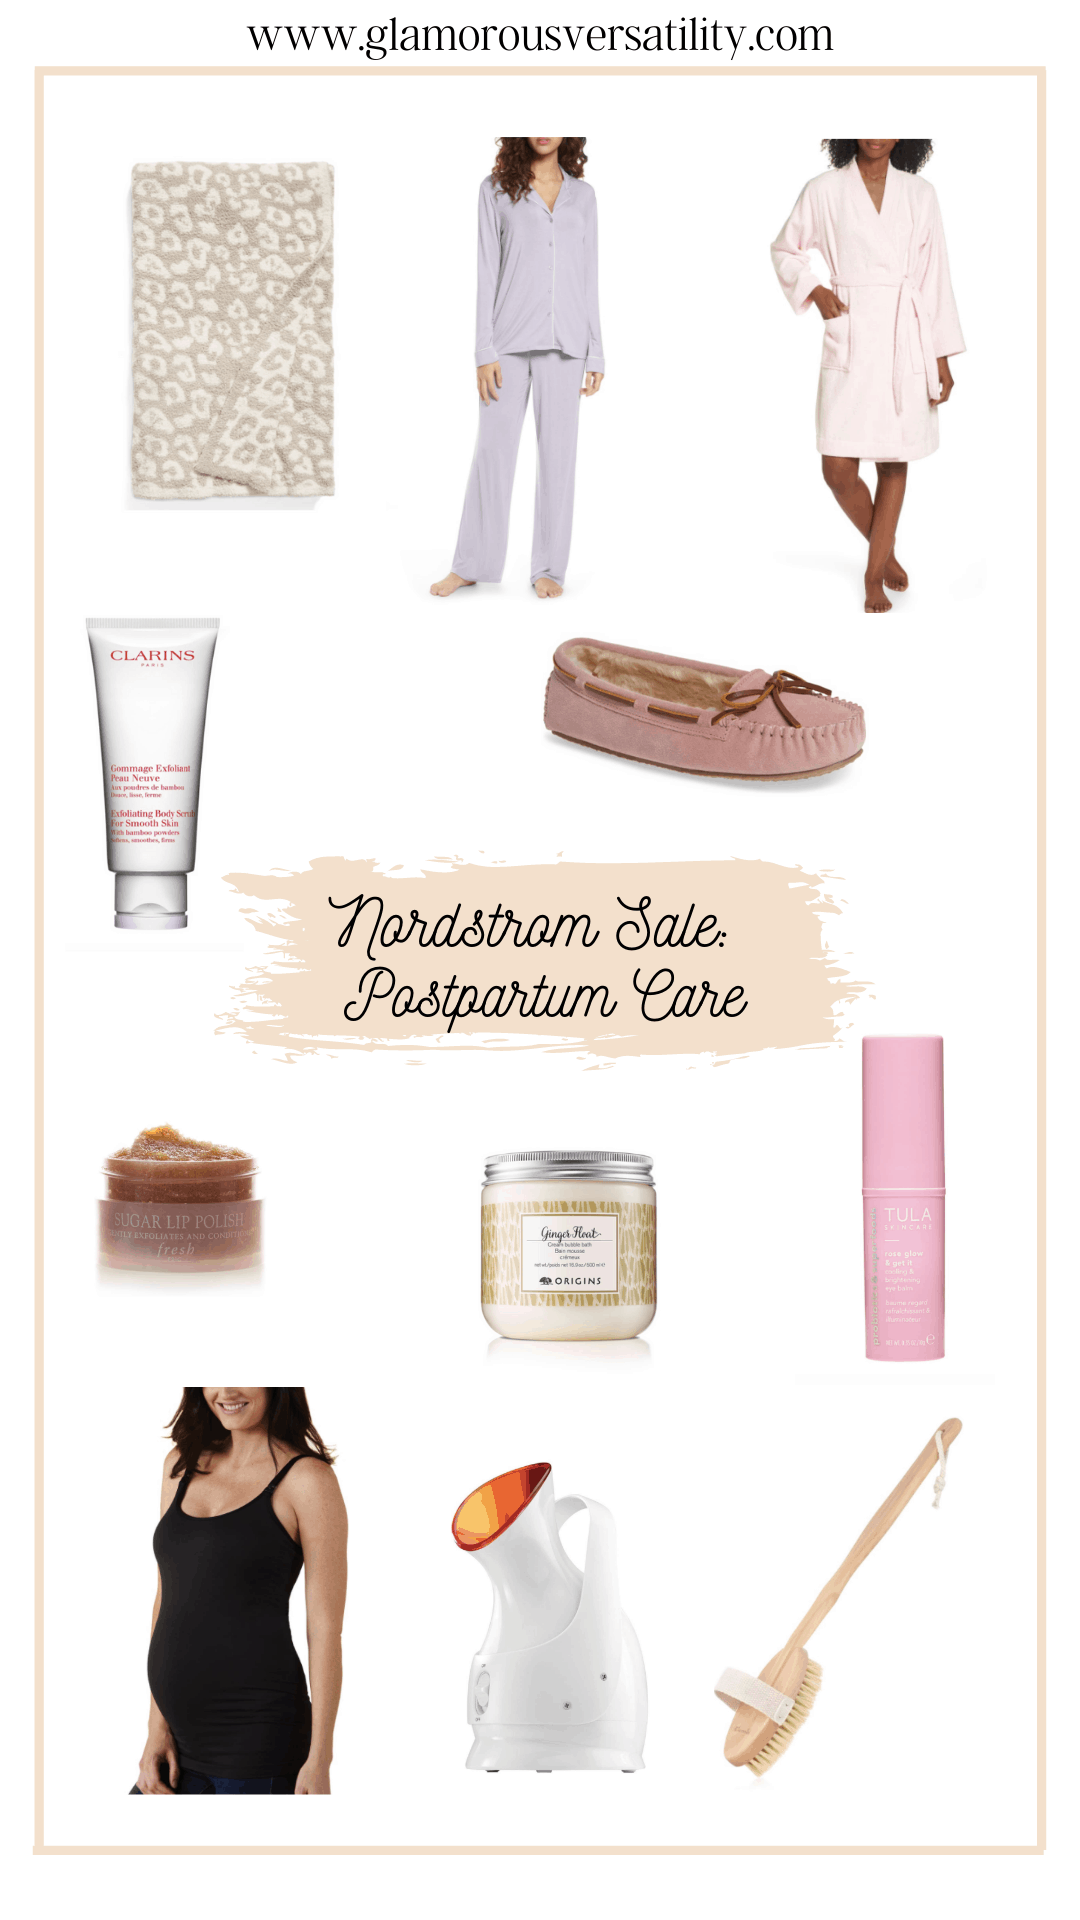 Postpartum Recovery Tips by popular Dallas motherhood blog, Glamorous Versatility: collage image of pink moccasin slippers, pink robe, barefoot dreams leopard print blanket, matching pajama set, black tank top, sugar lip polish, diffuser, Tula Skincare Rose Glow and Get it, body detox skin brush, Clarins exfoliating body scrub, and Ginger Heat bubble bath. 